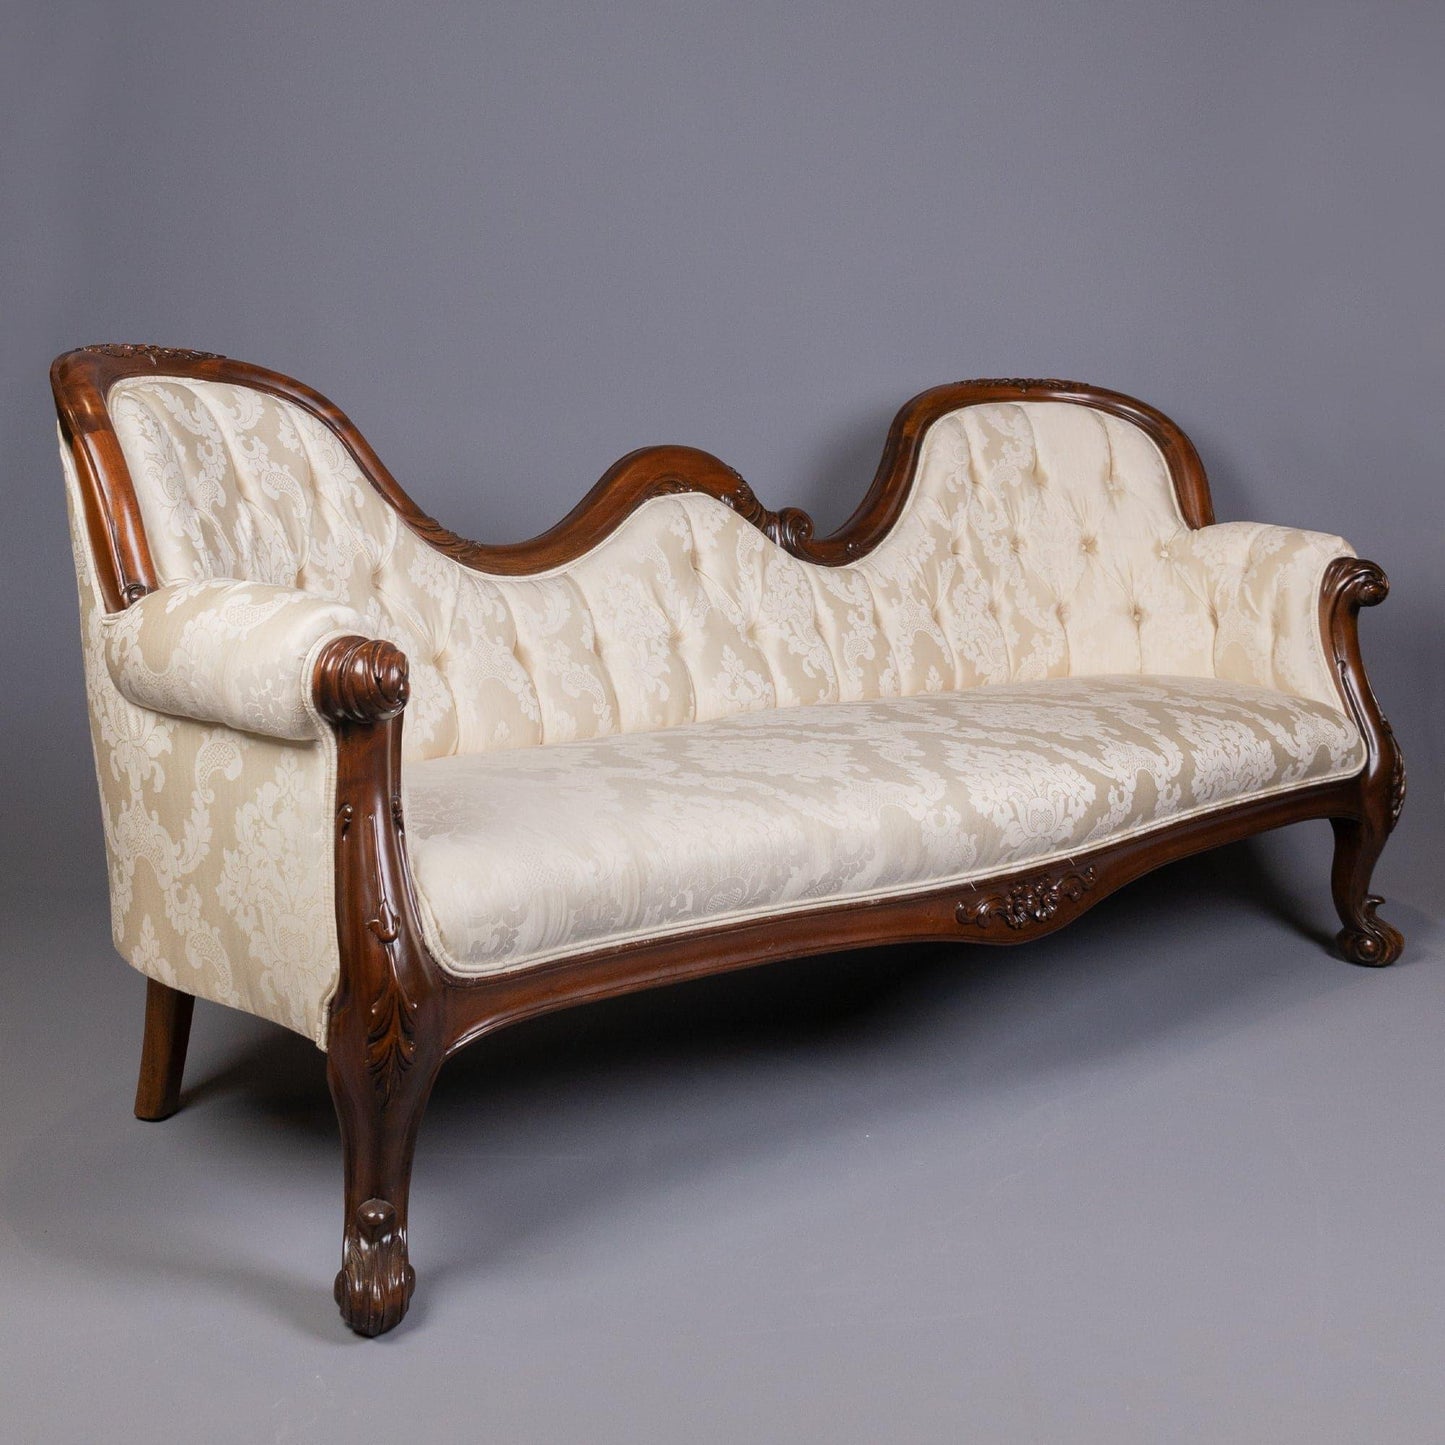 VICTORIAN STYLE SOFA - House of Chippendale